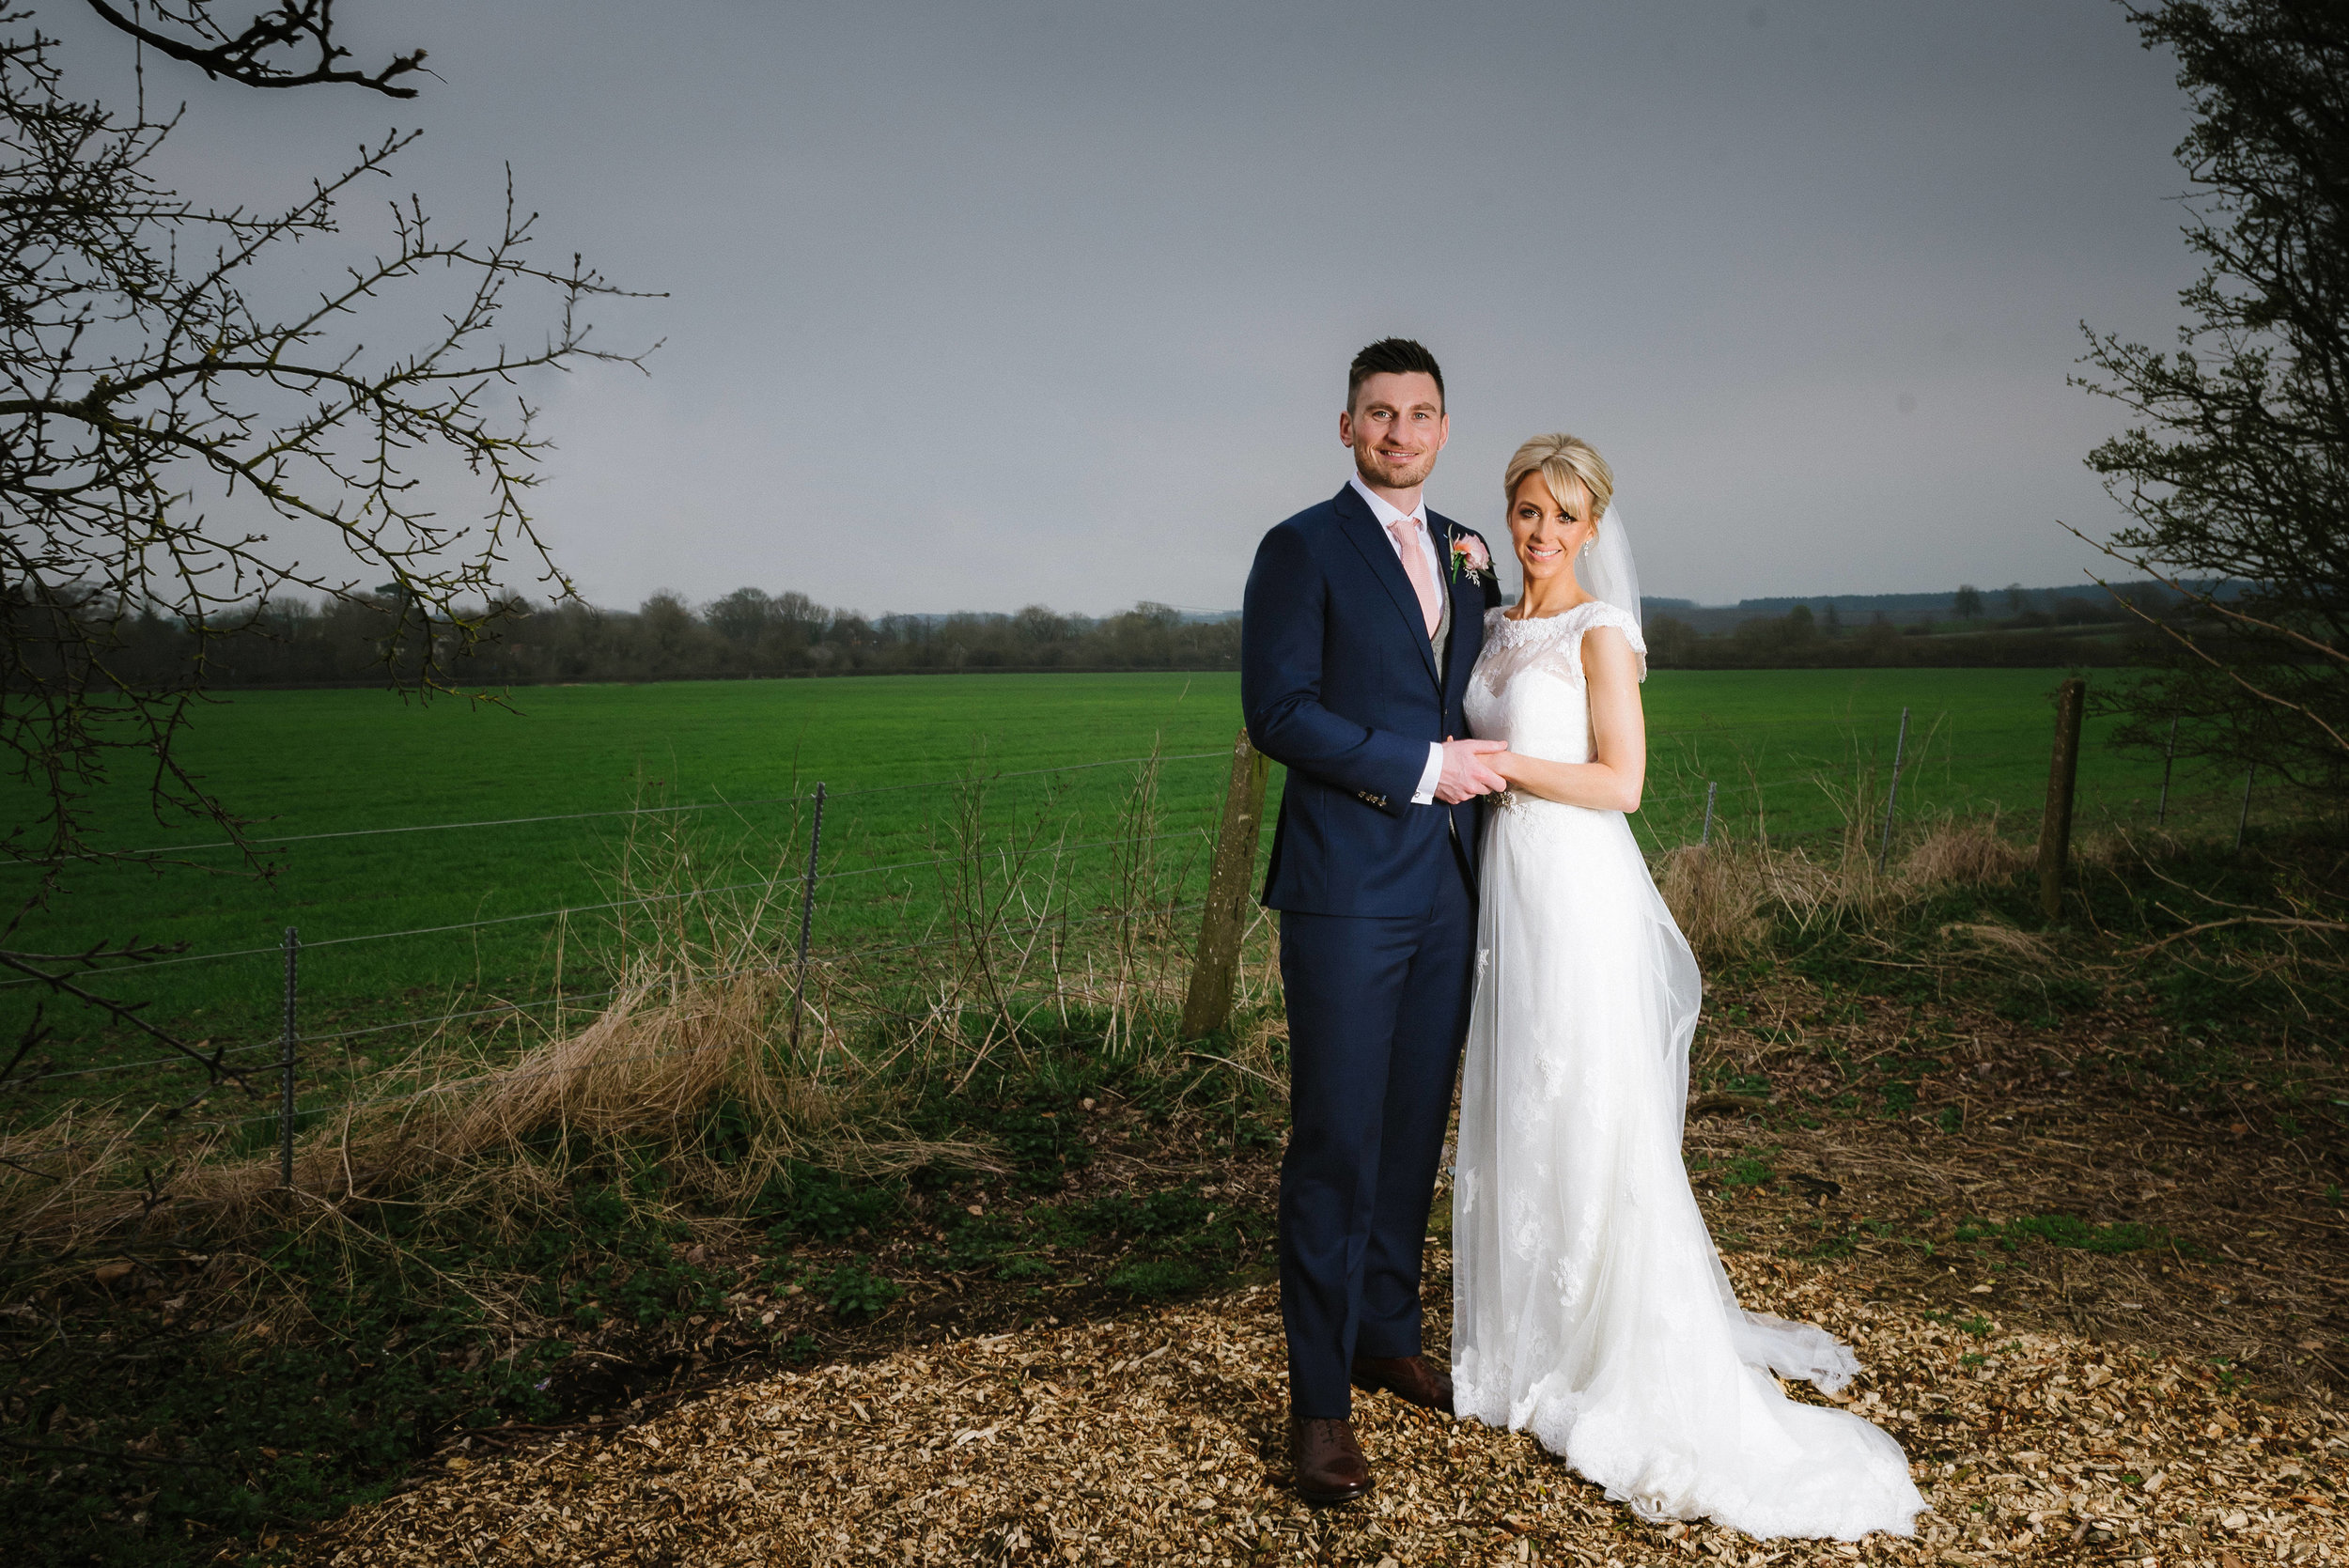 A wedding portrait of the bride and groom at the Carriage Hall wedding photography